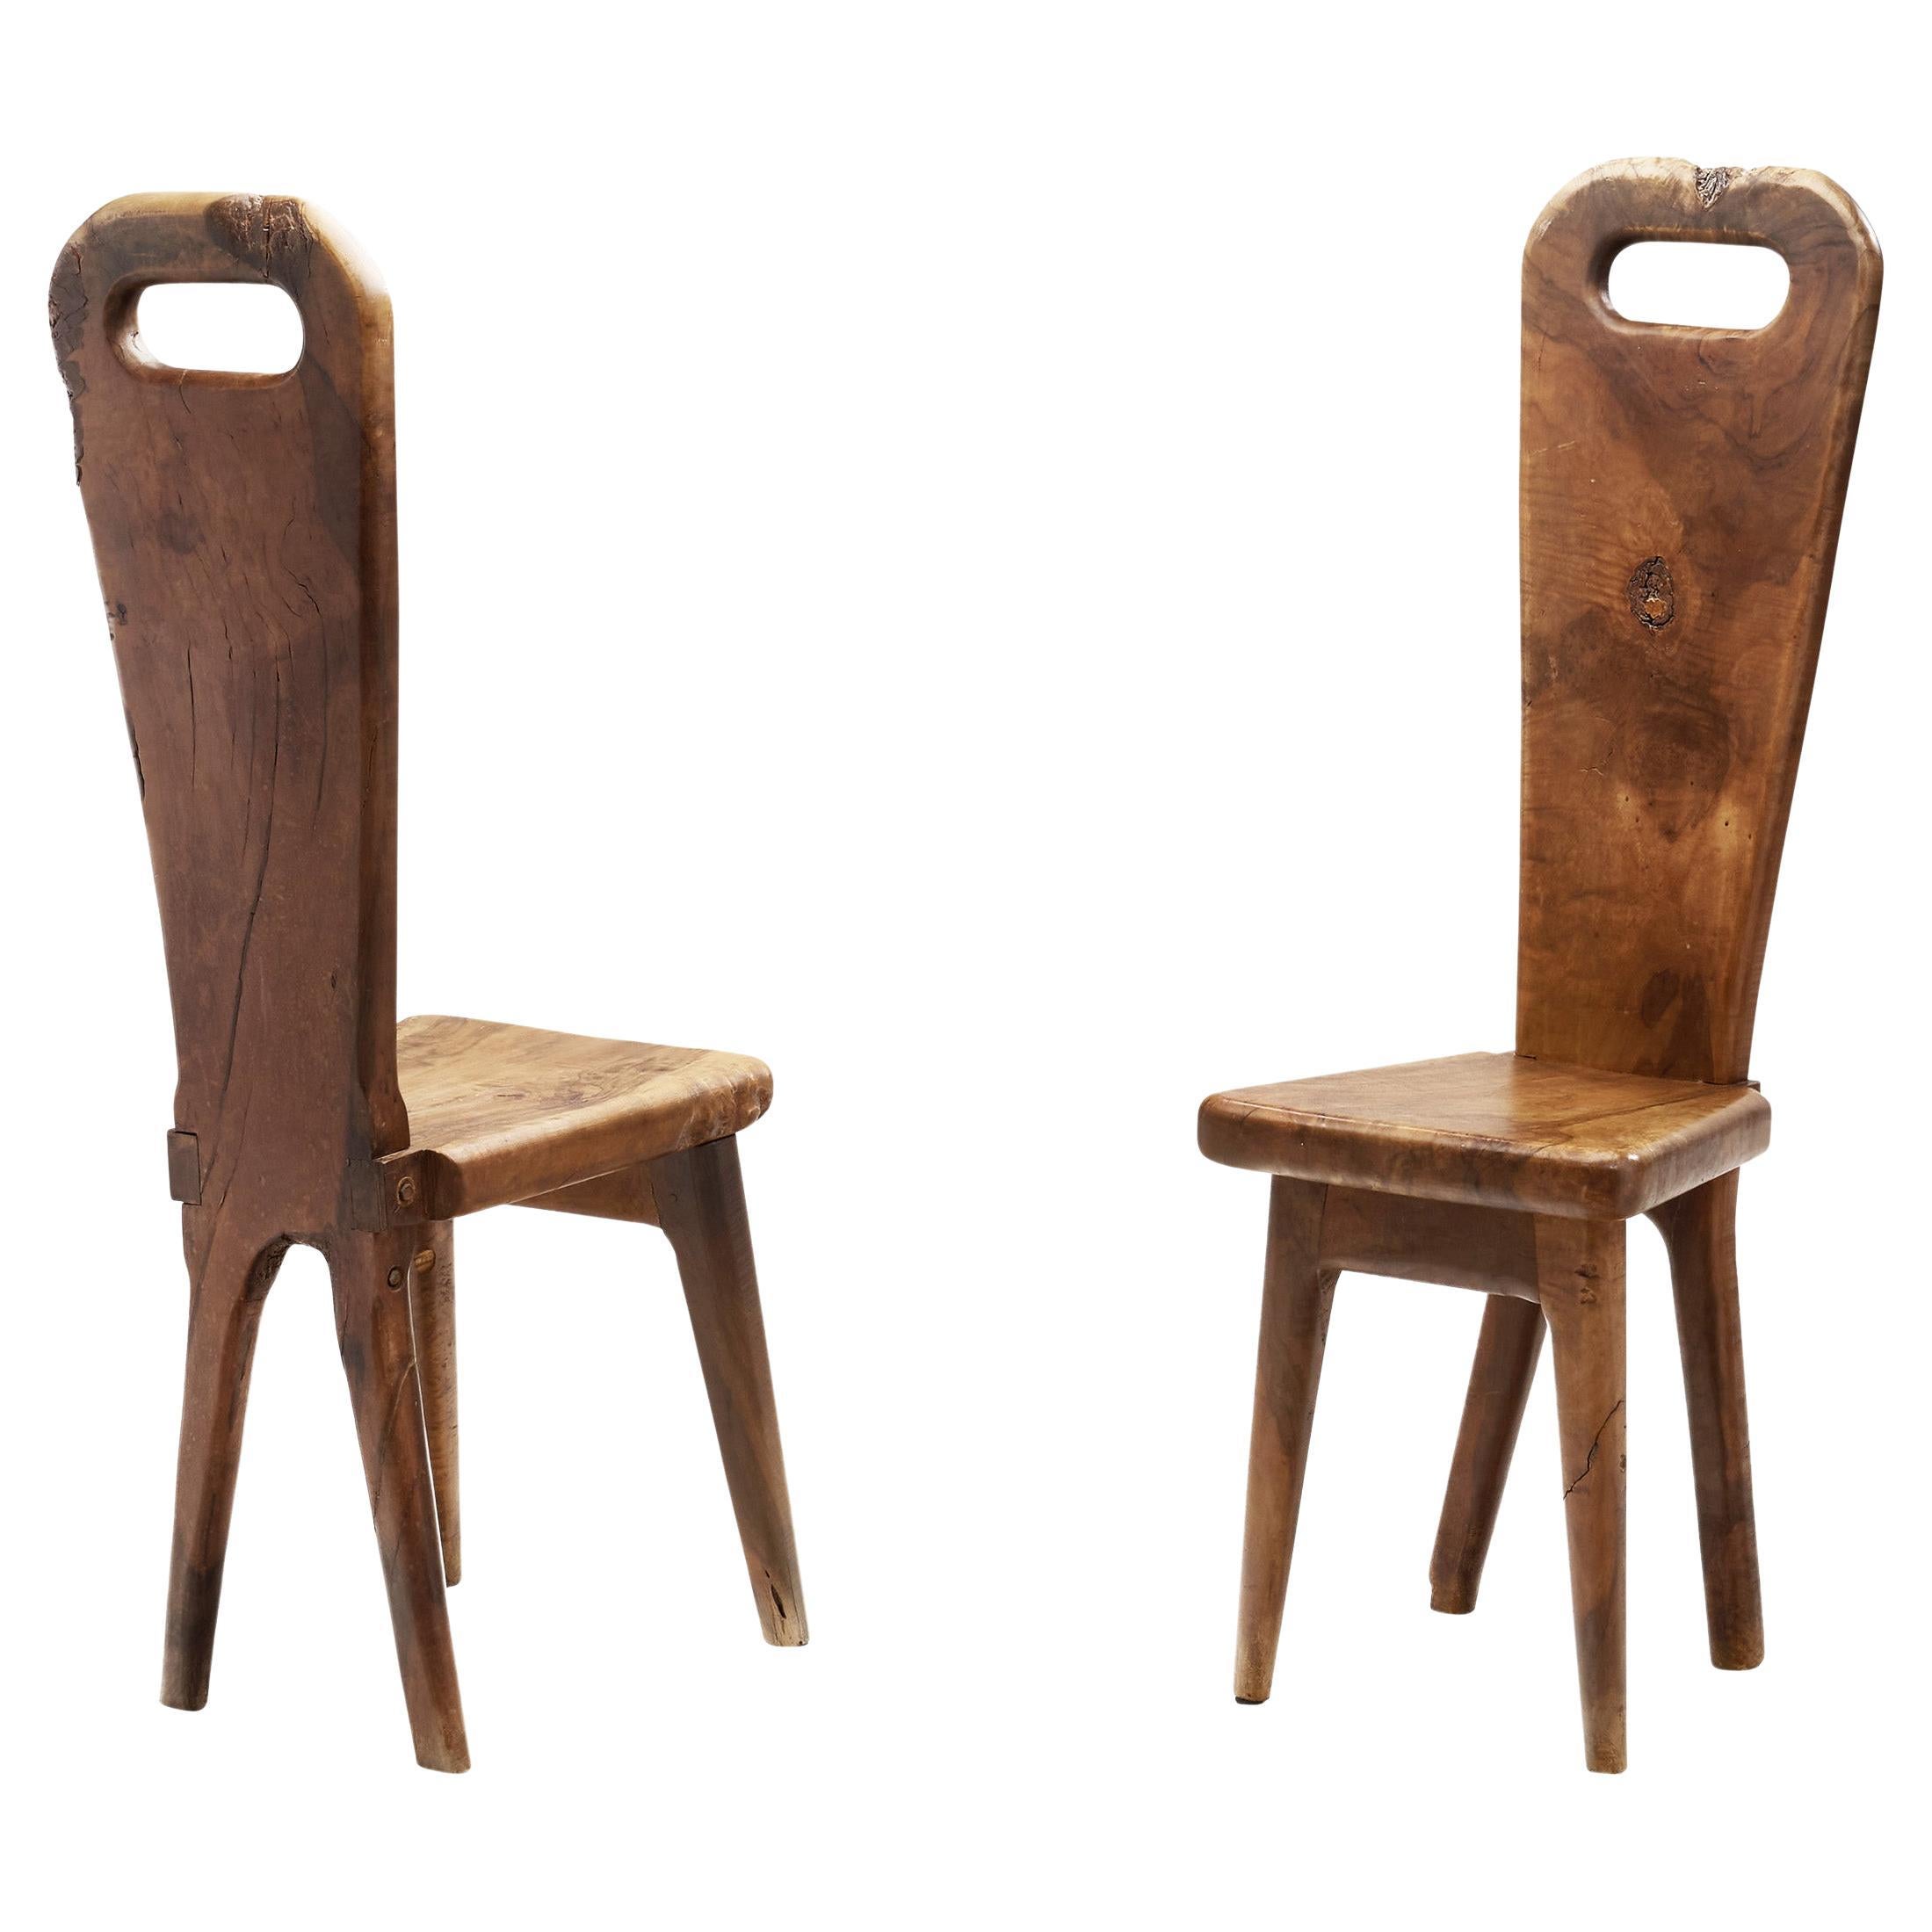 Olive Wood Sculptural High Back French Chairs, France, circa 1970s For Sale